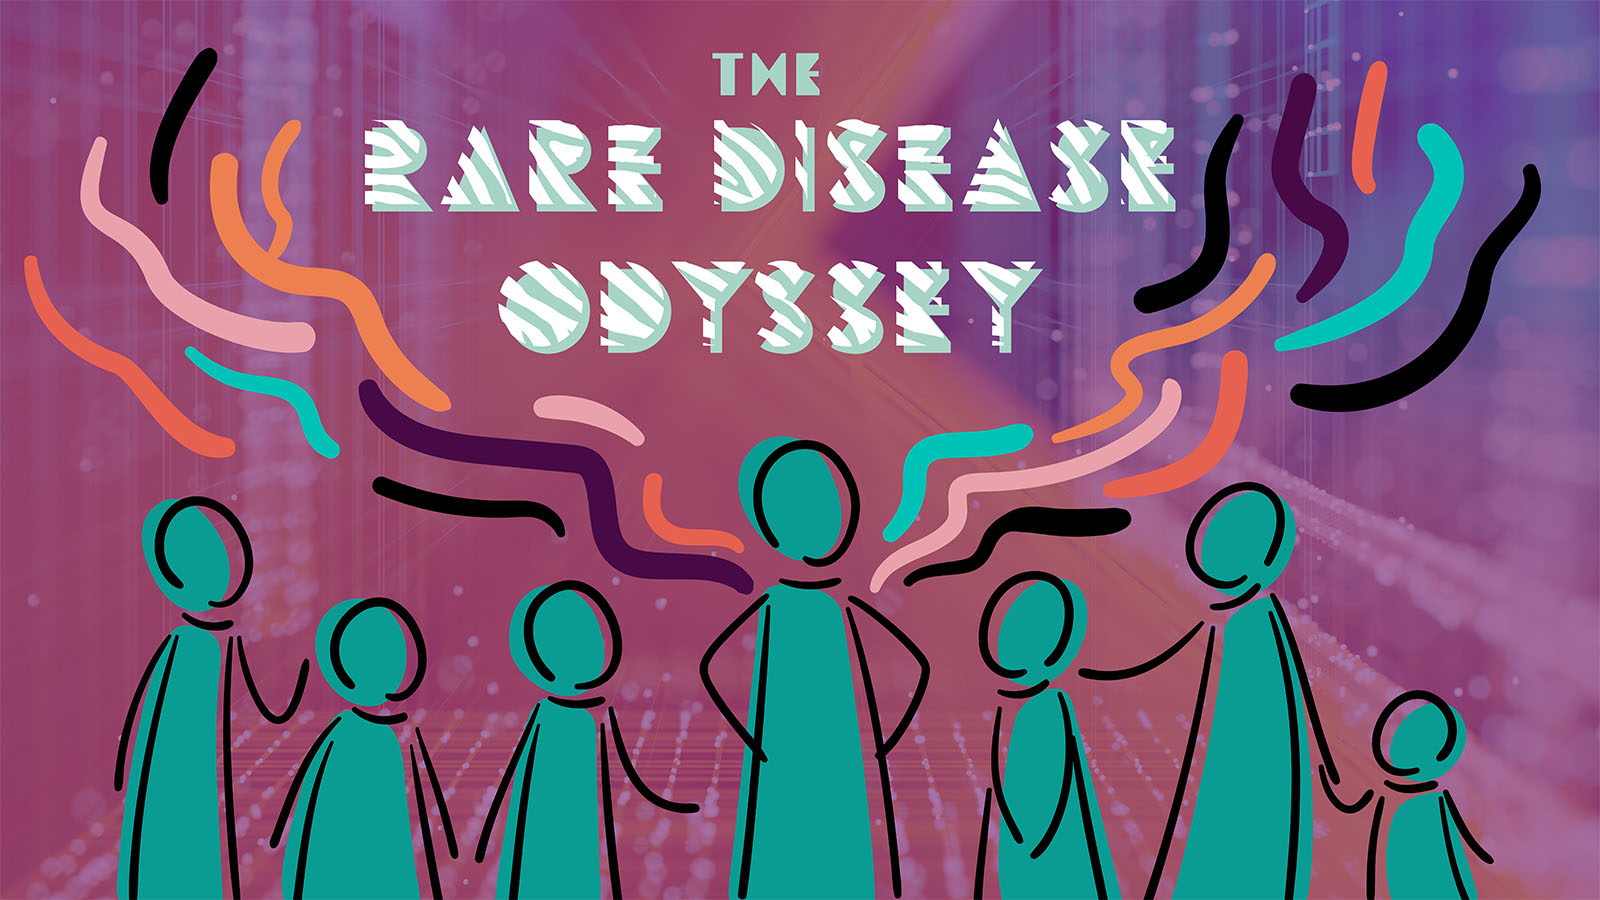 A banner image depicting the rare disease odyssey.